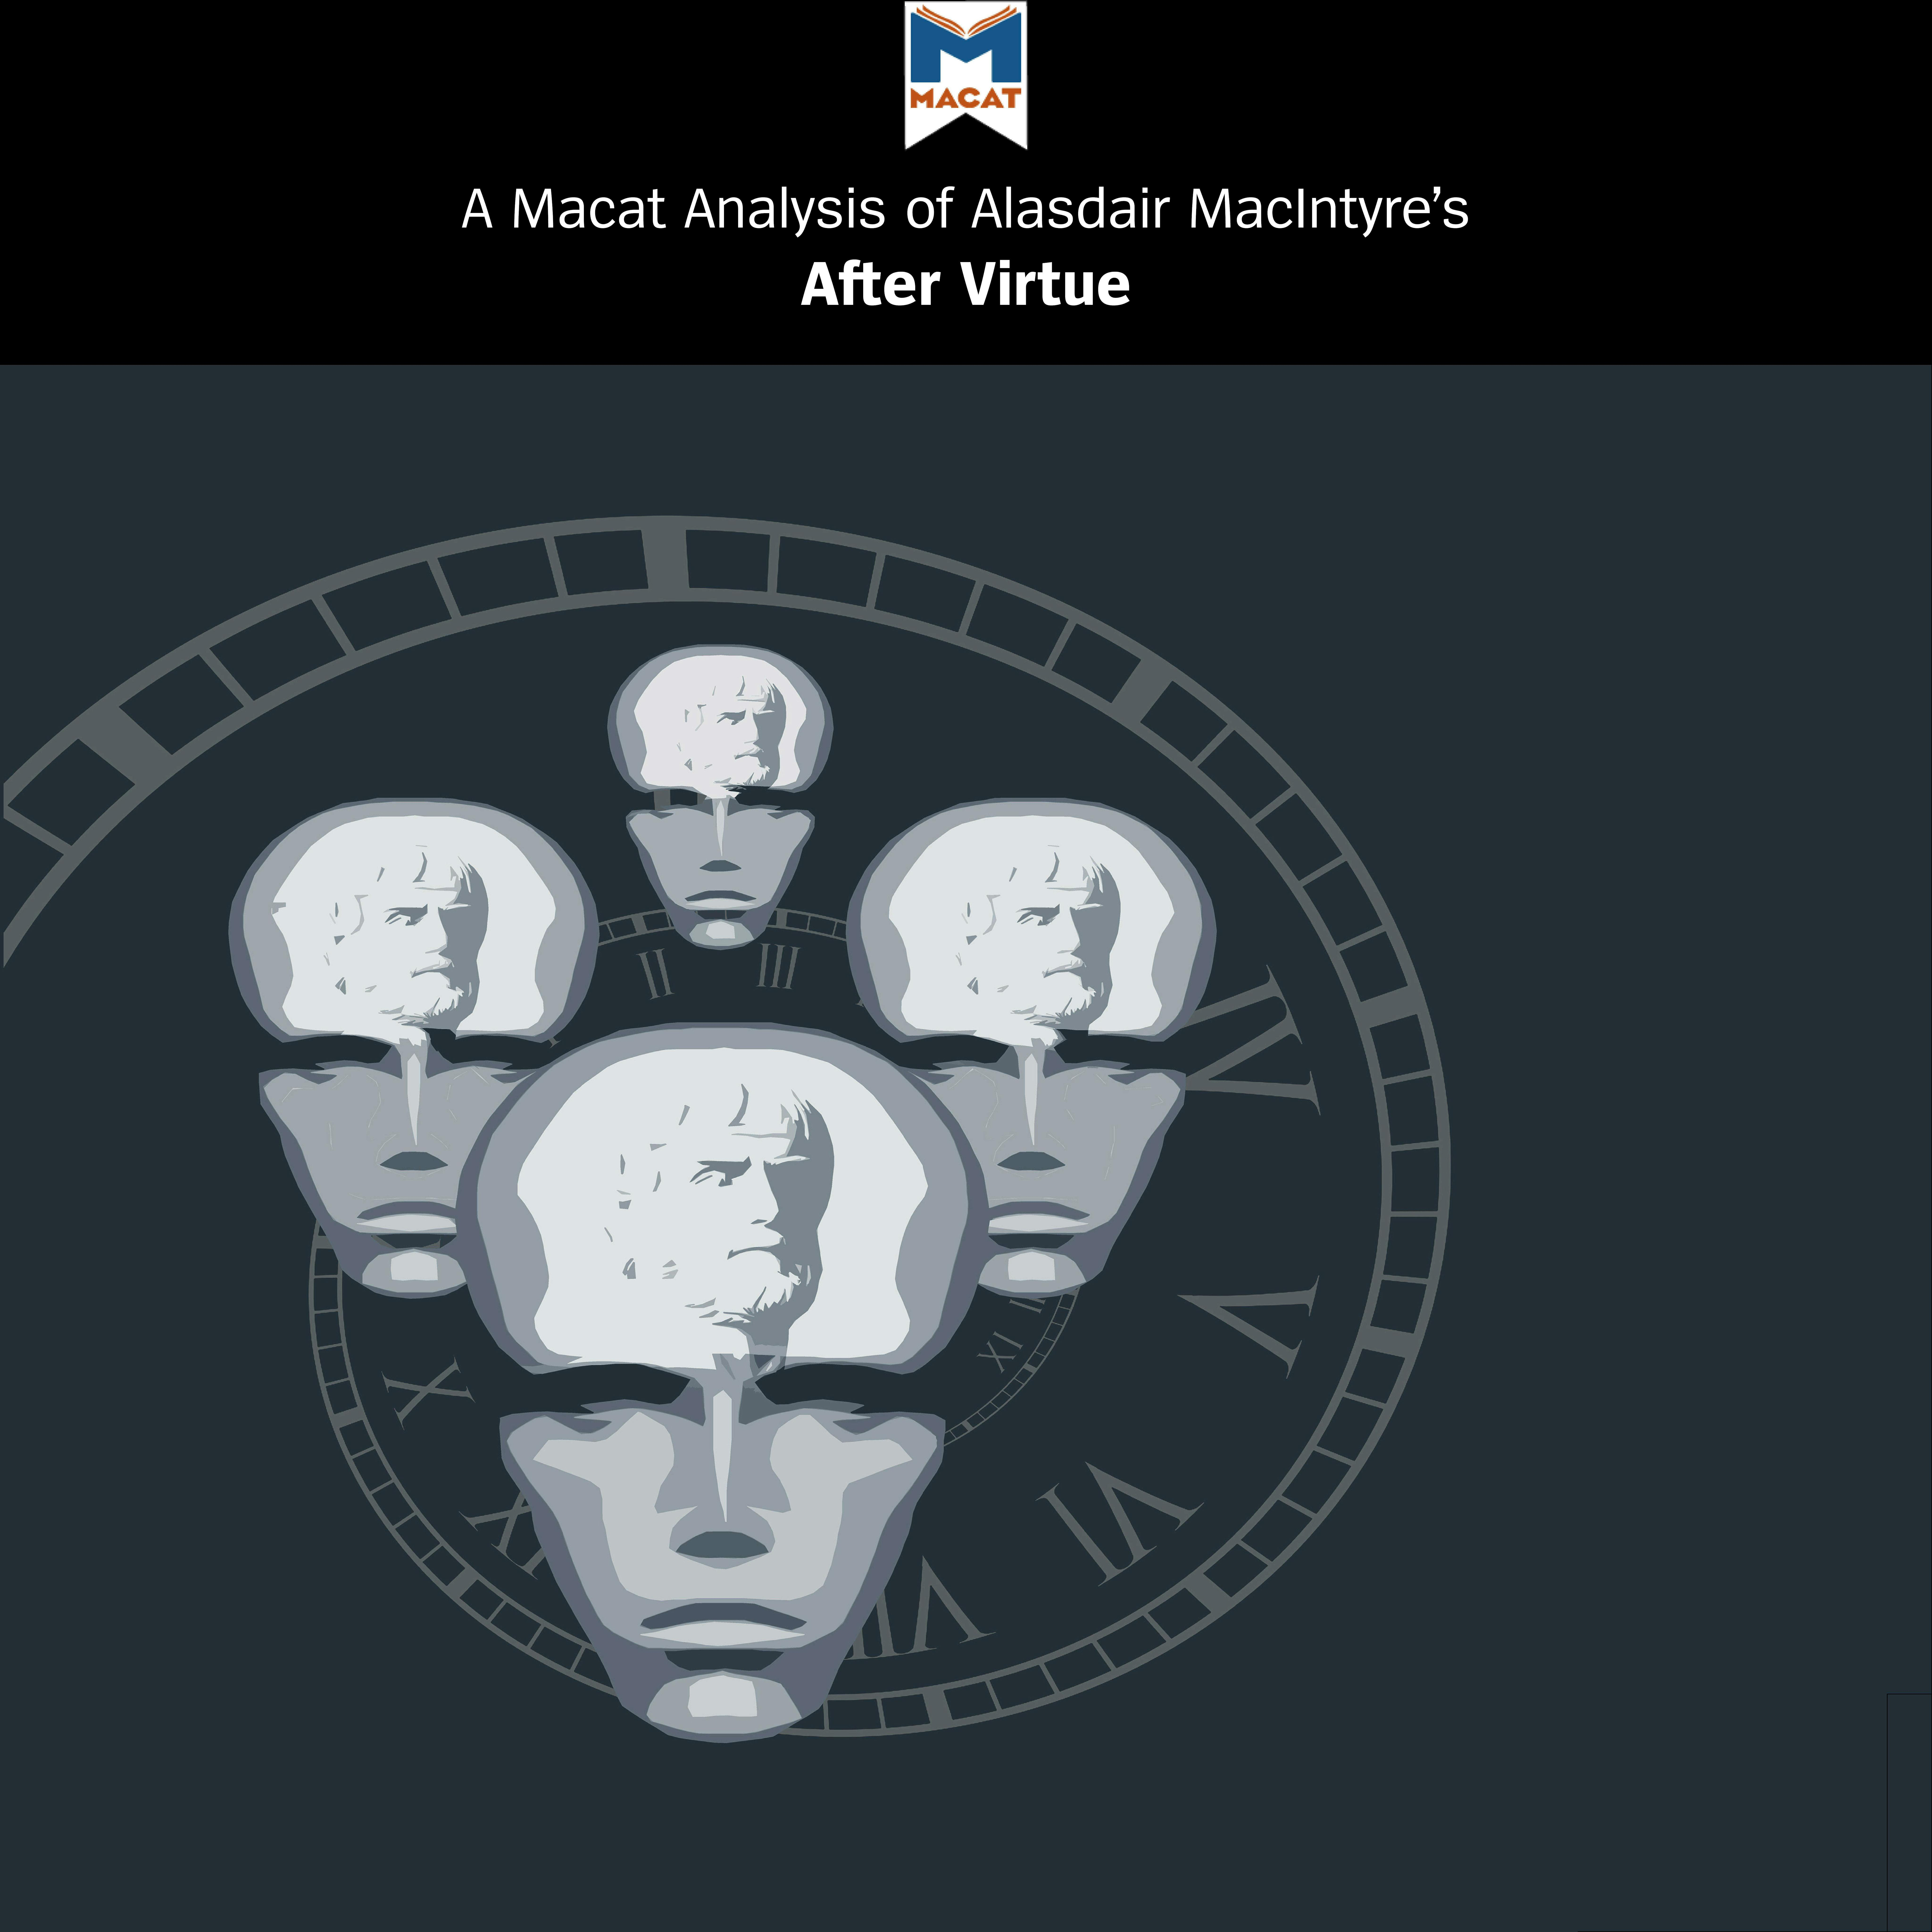 A Macat Analysis of Alasdair MacIntyre's After Virtue - undefined